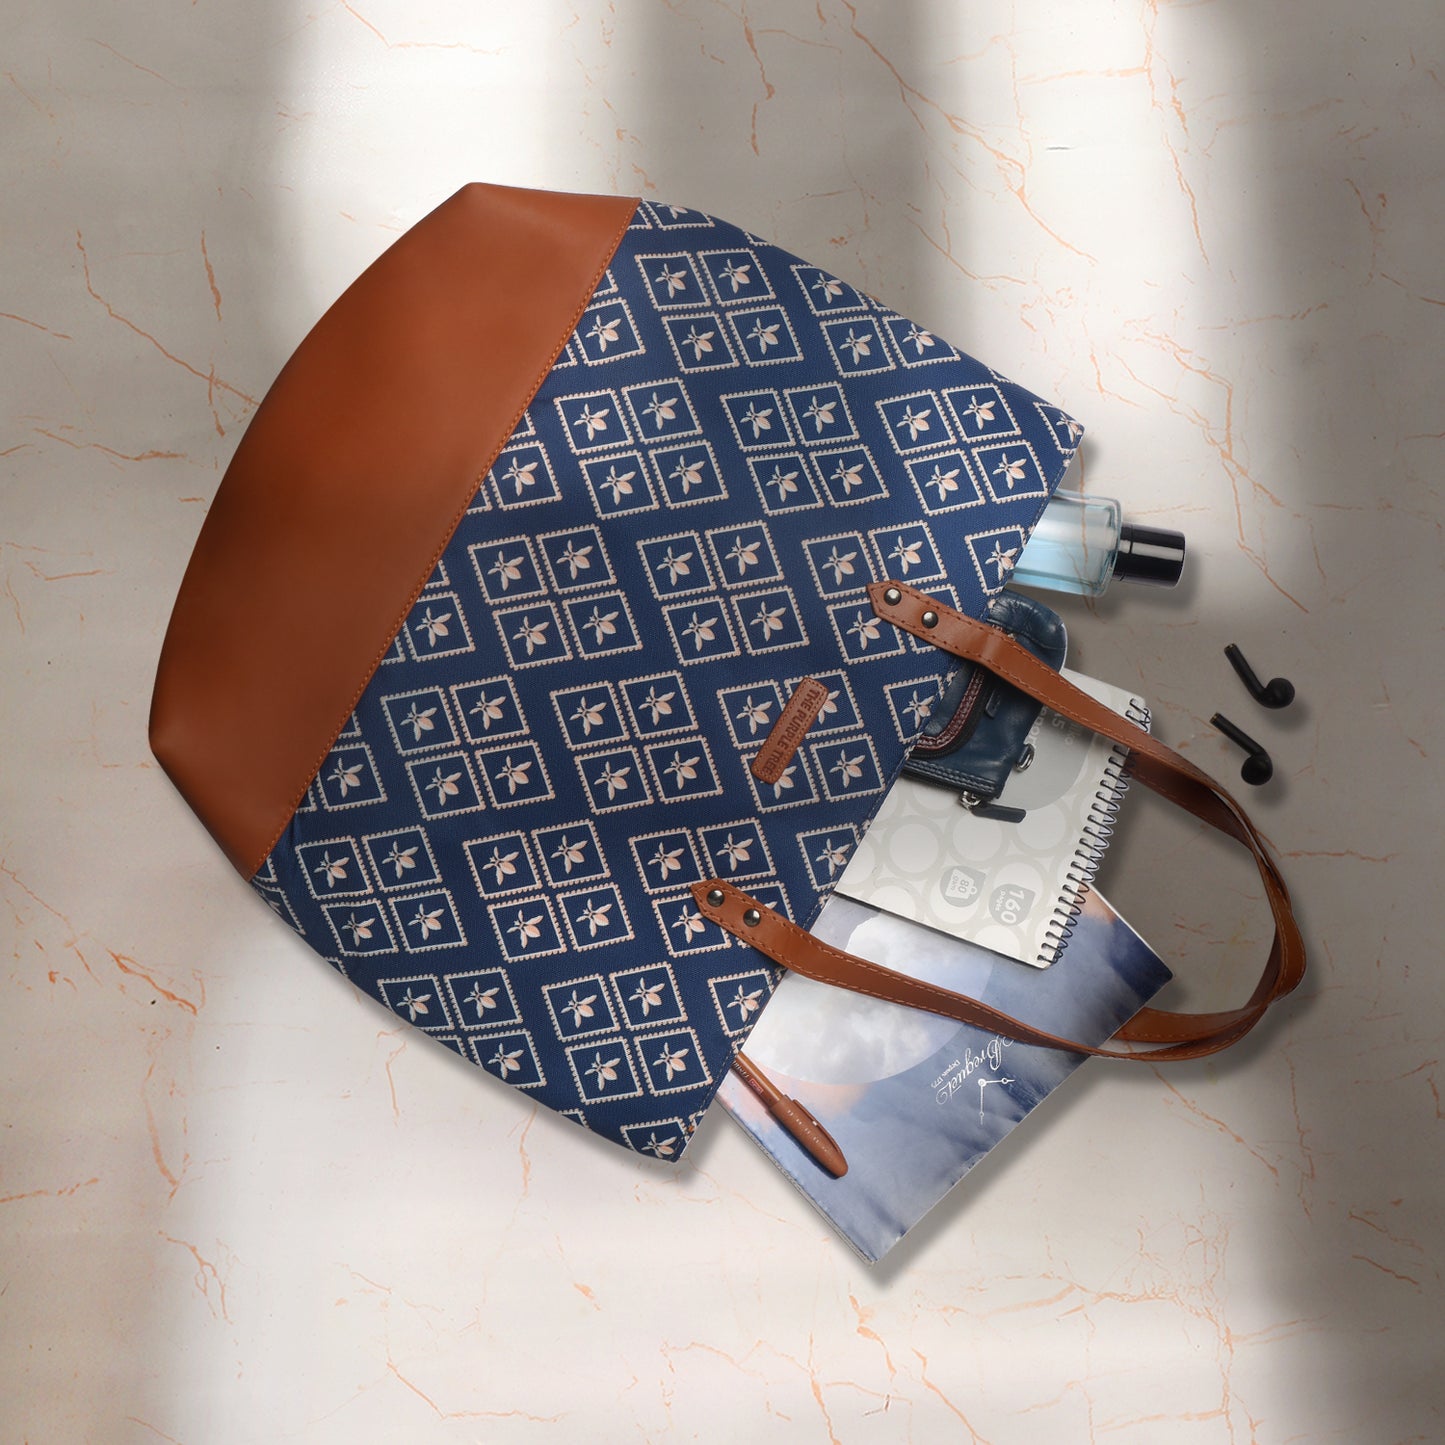 Wooden chair next to a stylish blue and brown tote bag